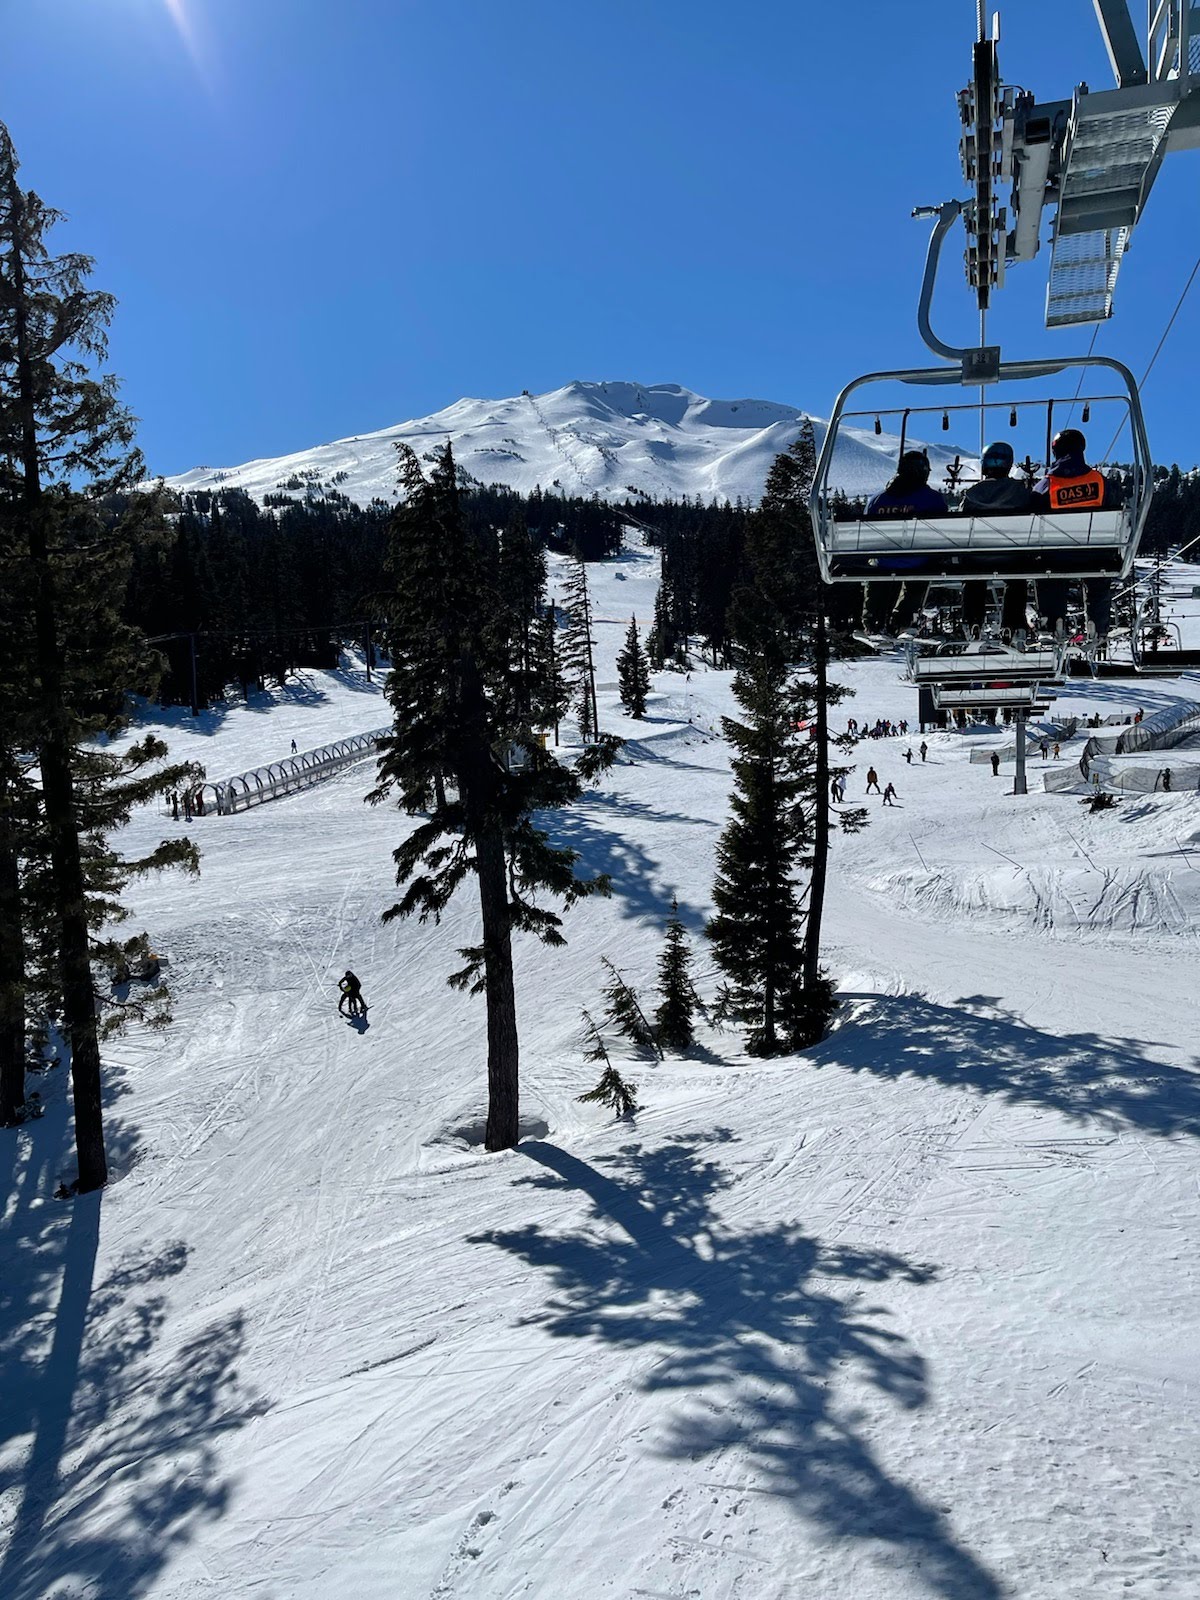 Dave riding the chairlift on a sunny day at Mt Bachelor